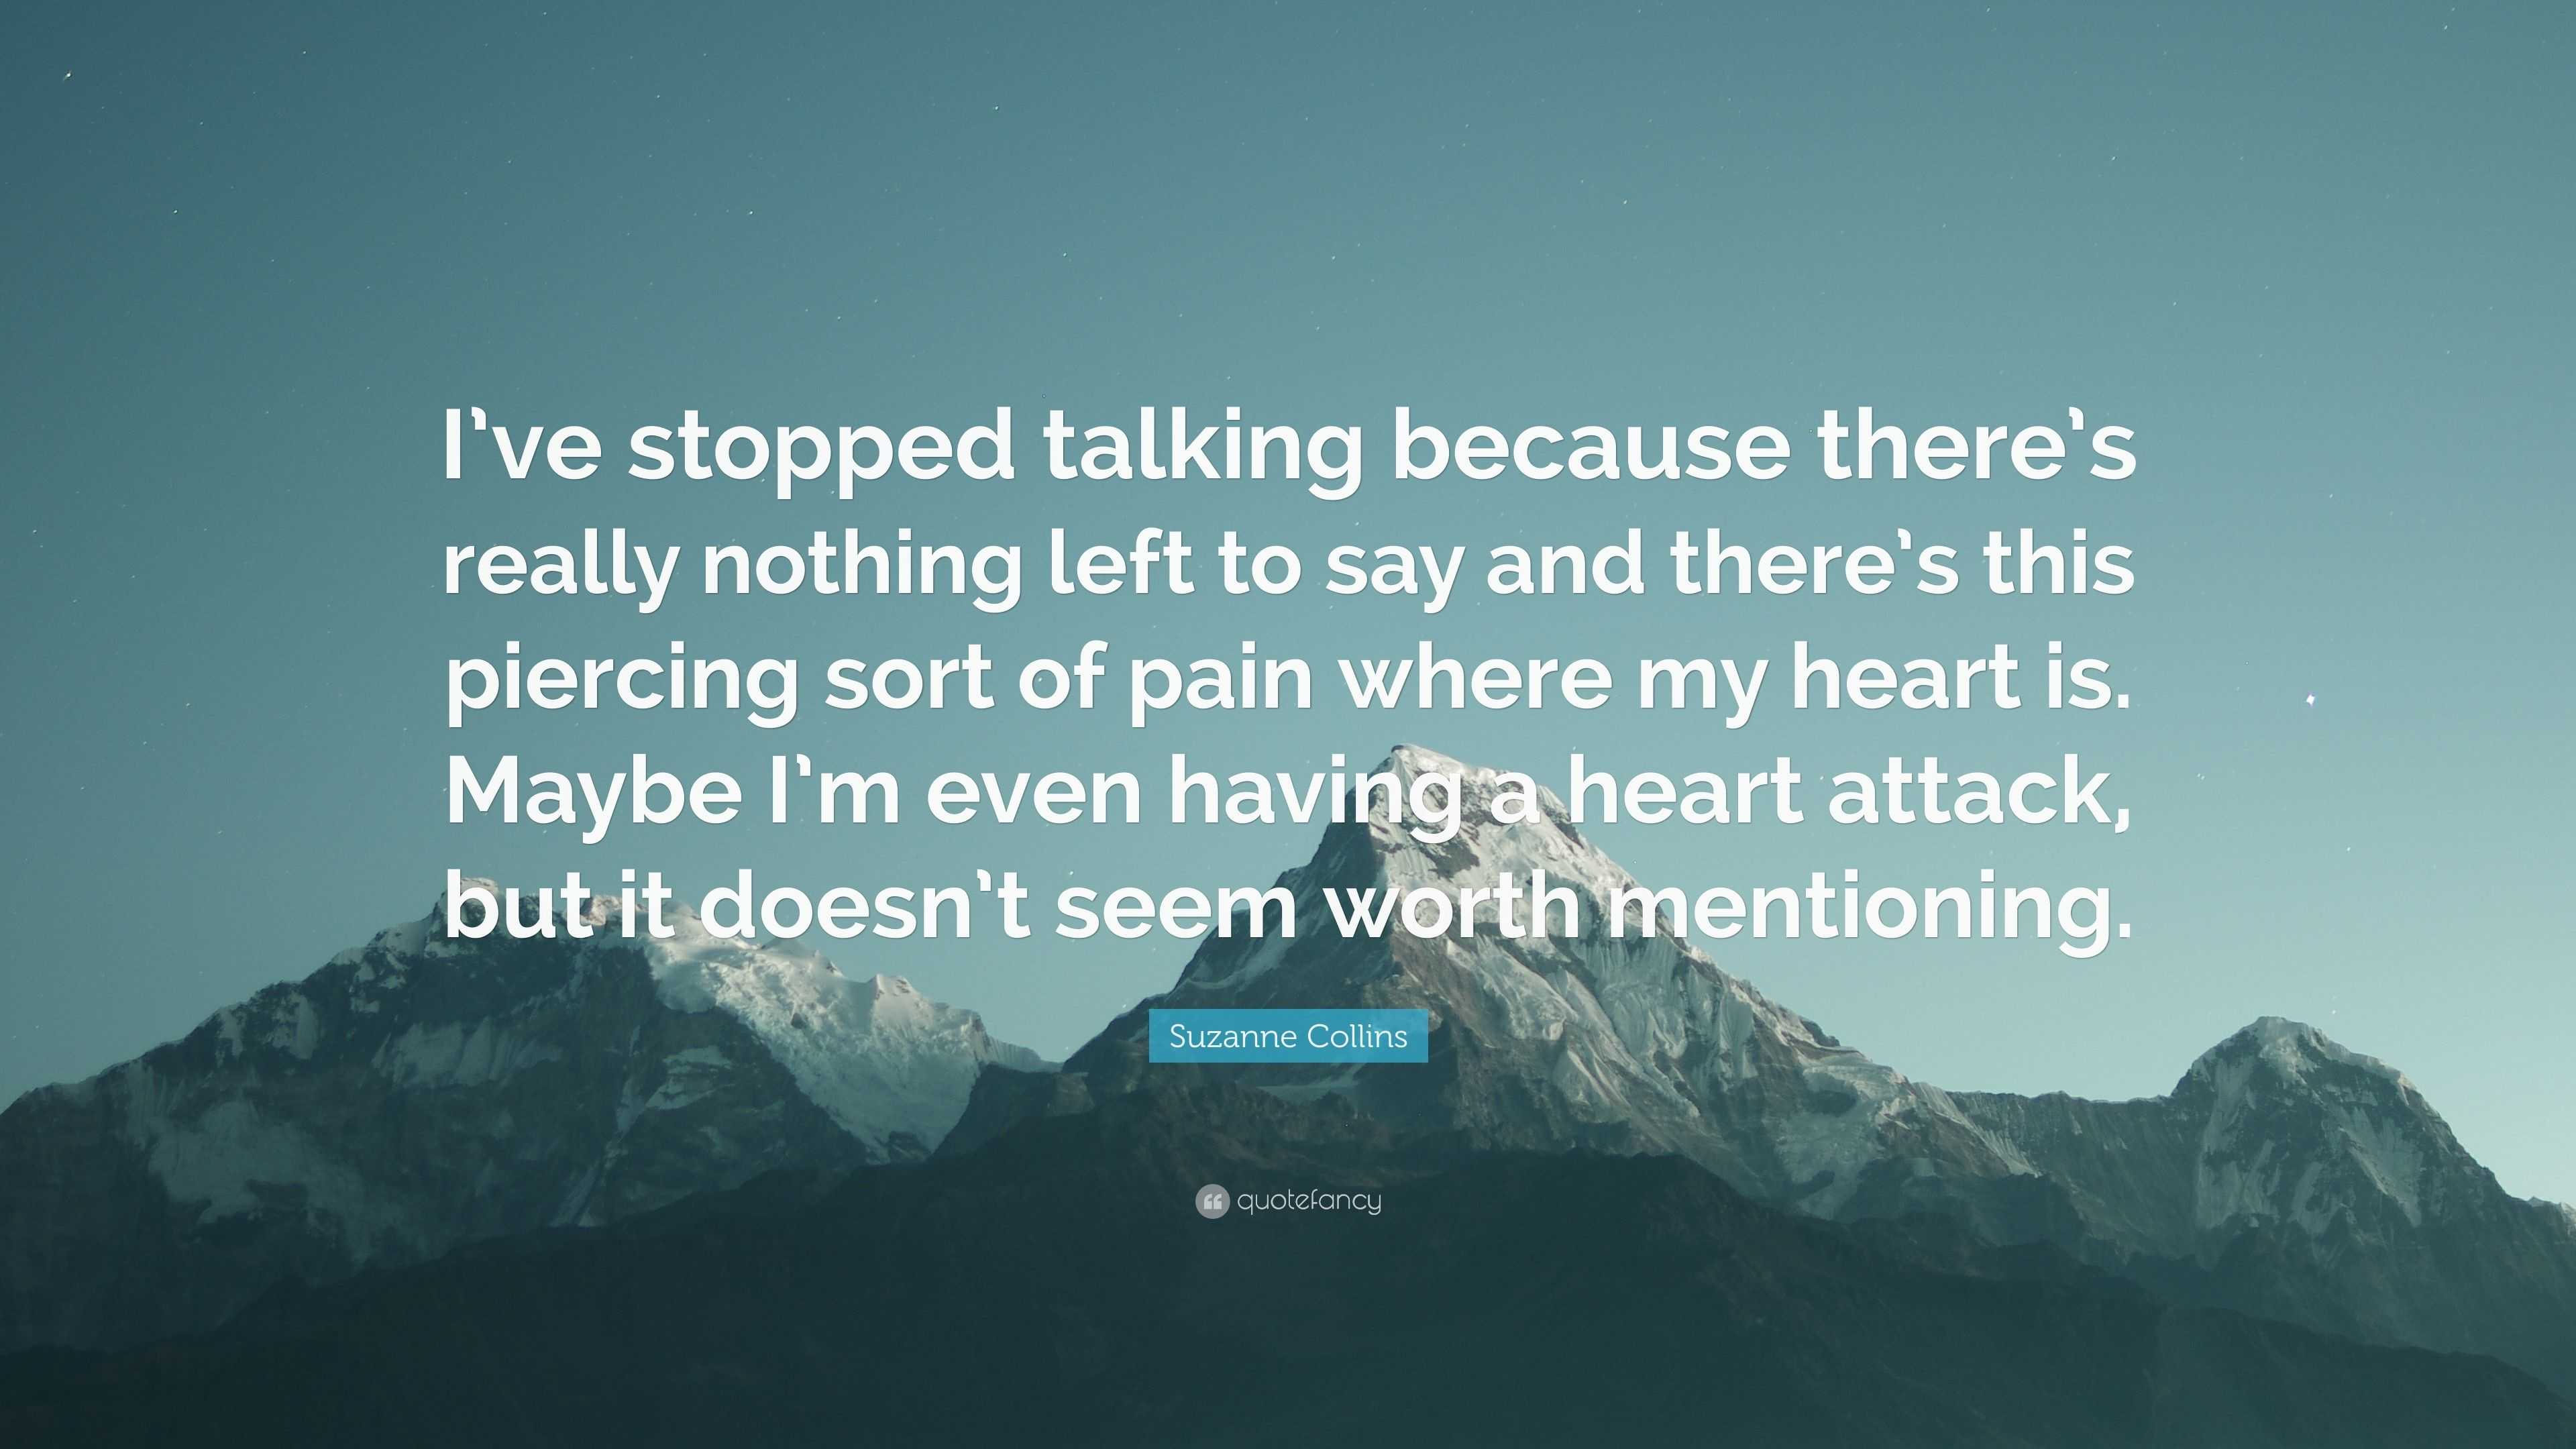 Suzanne Collins Quote: “I've Stopped Talking Because There's Really Nothing Left To Say And There's This Piercing Sort Of Pain Where My Heart Is...”